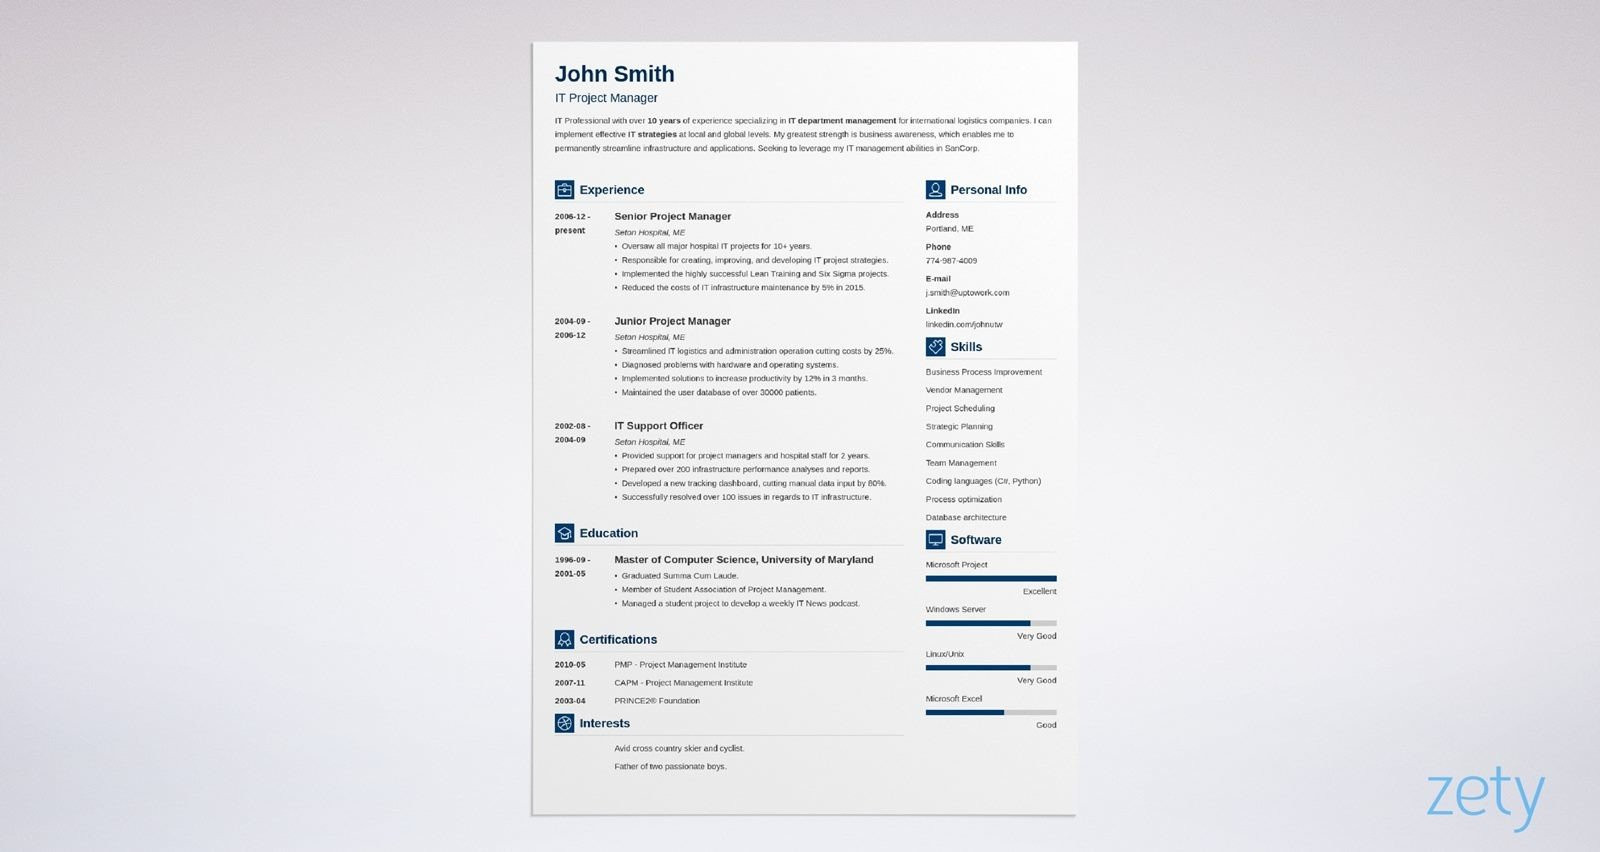 Fill In the Blank Functional Resume Template 15lancarrezekiq Blank Resume Templates & forms to Fill In and Download